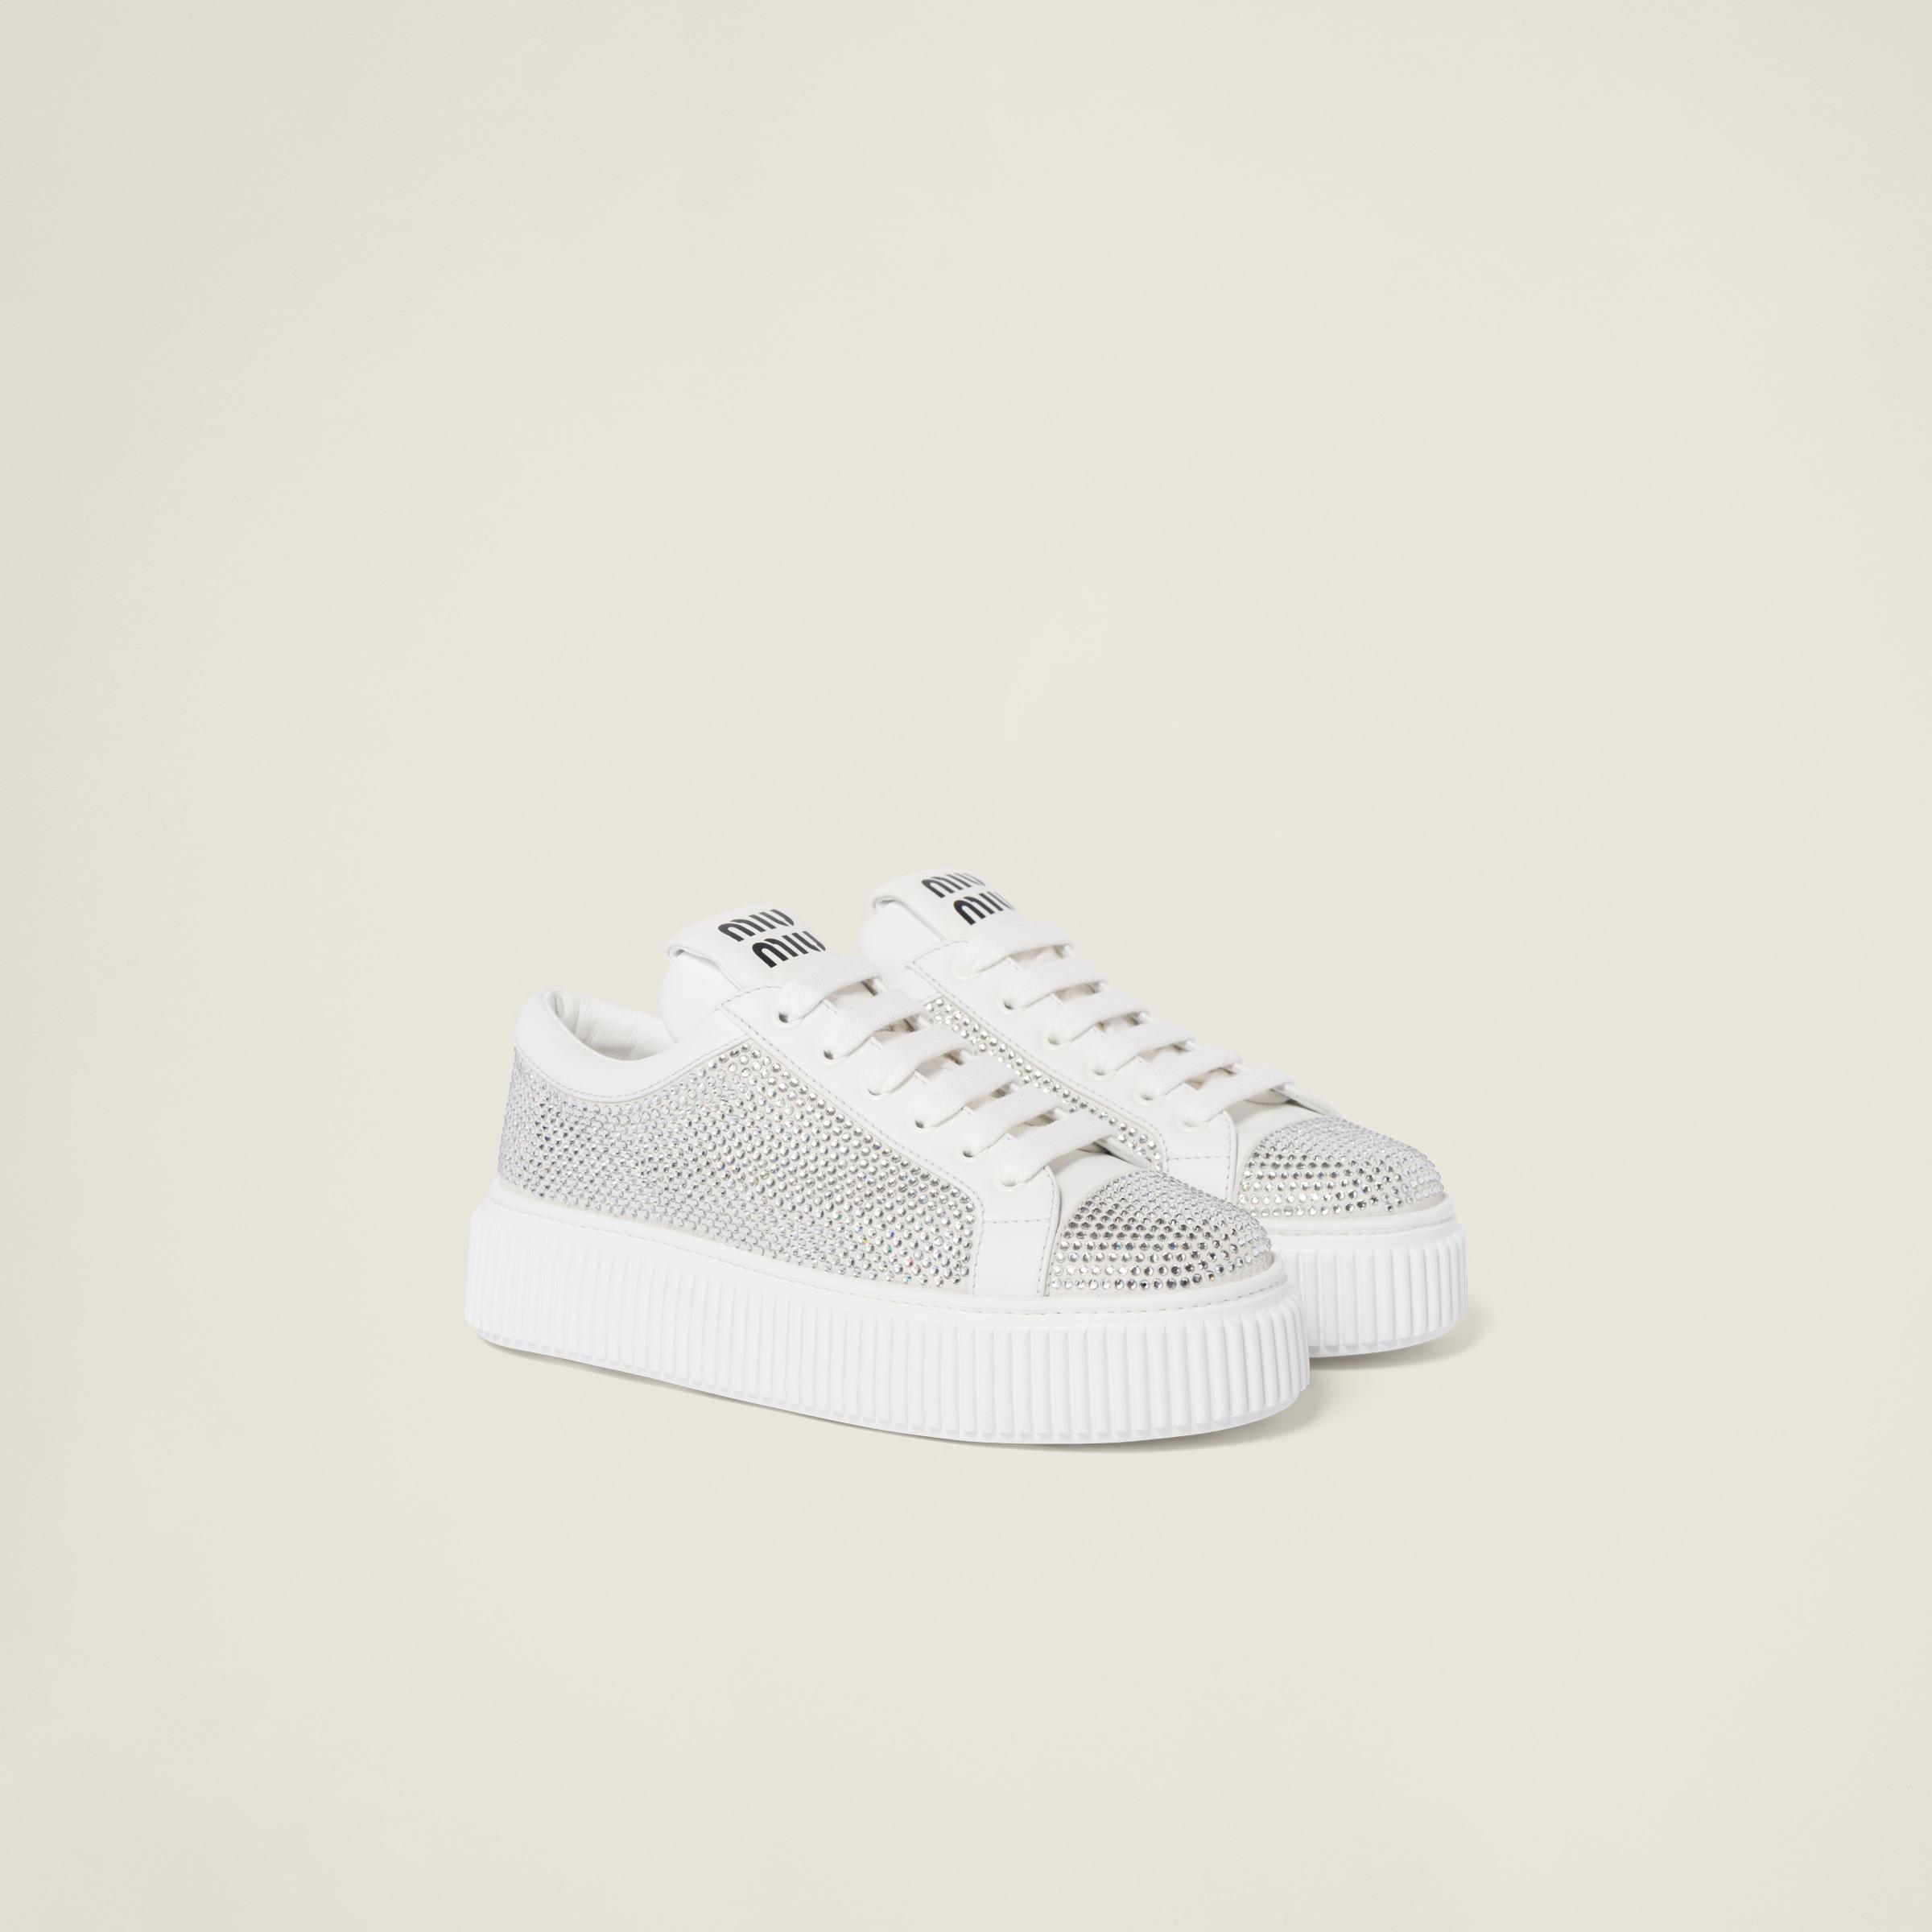 Miu Miu Suede And Smooth Leather Sneakers in White | Lyst